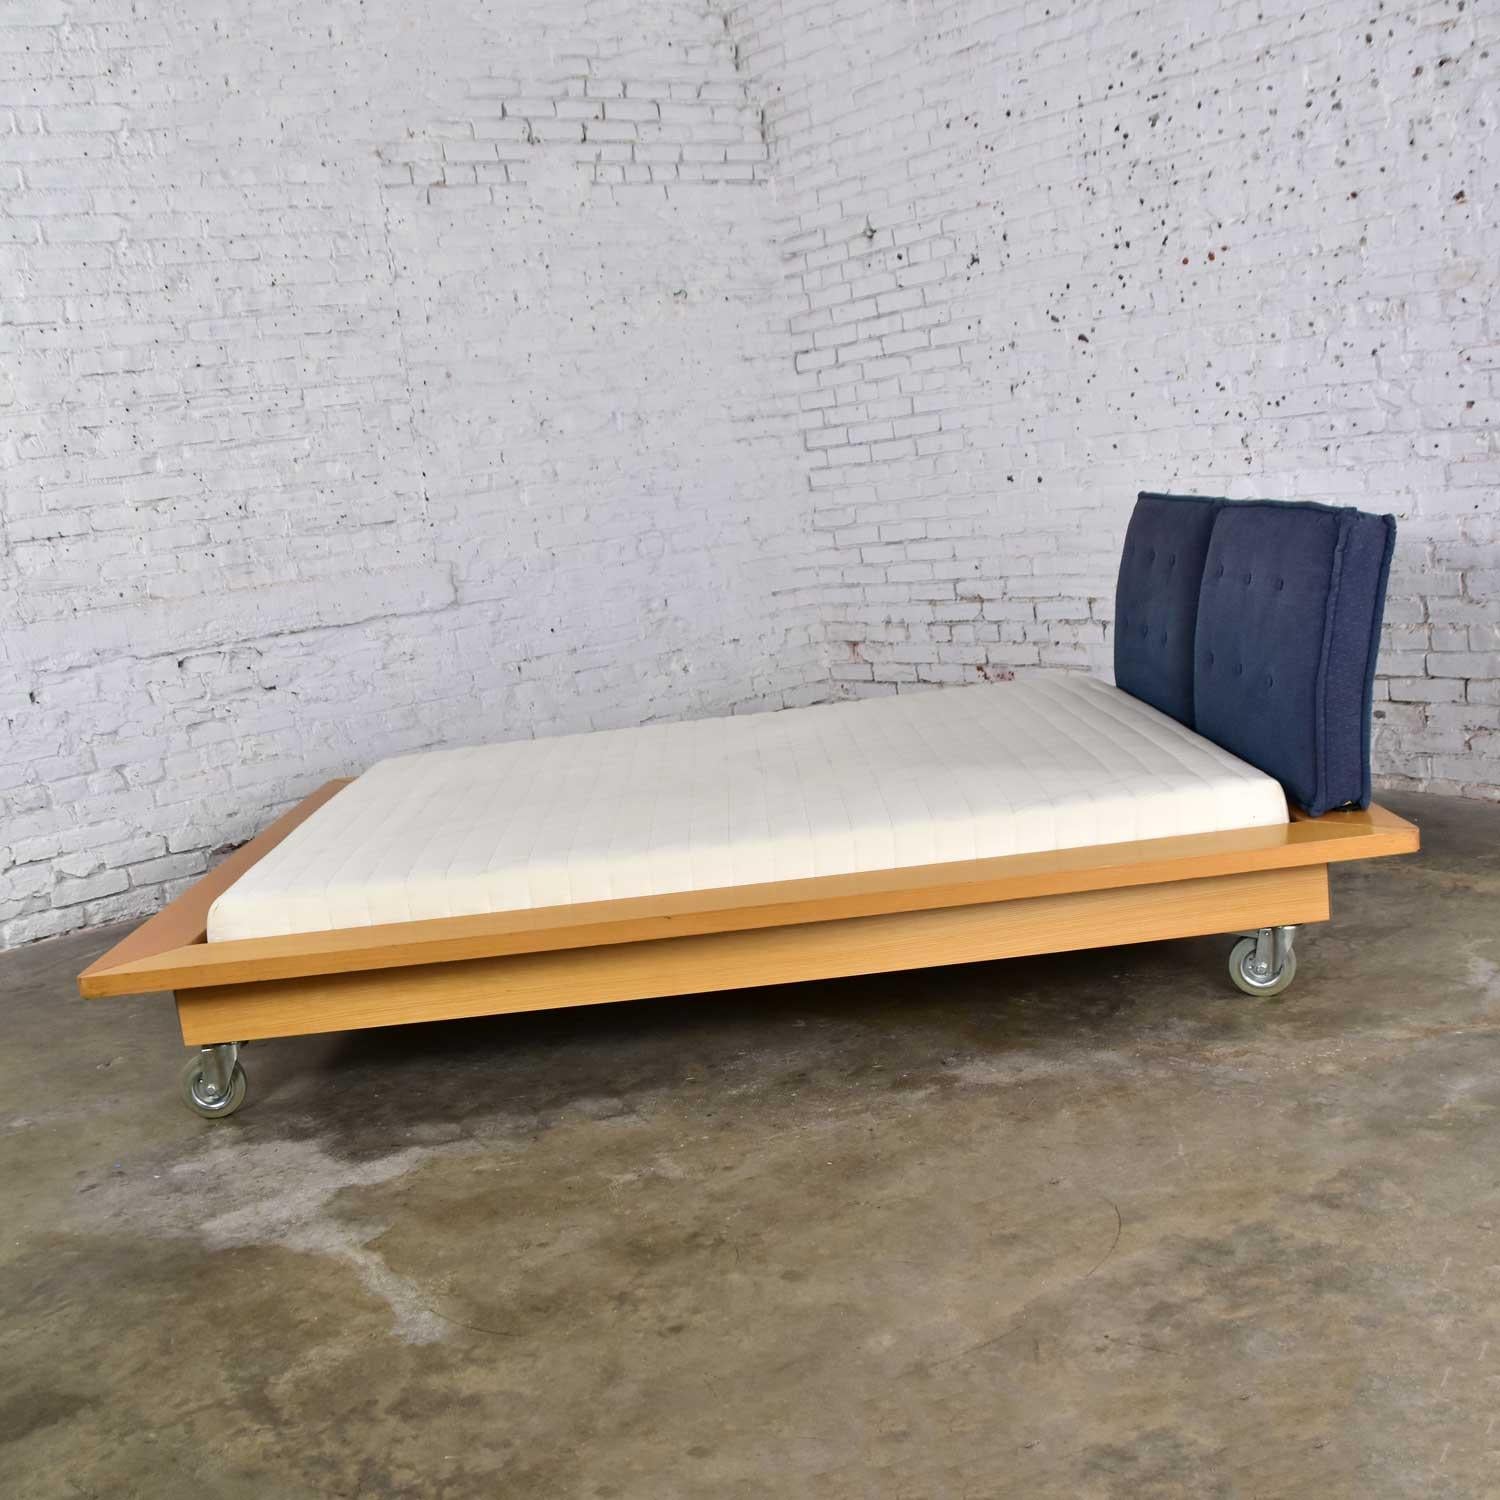 Wonderful Ligne Roset Parallele Postmodern European King size (77 x 63 x 6) platform bed attributed to Peter Maly. Comprised of ashwood veneer frame and gray anodized plate aluminum spacers; webbed platform slats; 5-inch rubber casters; and a